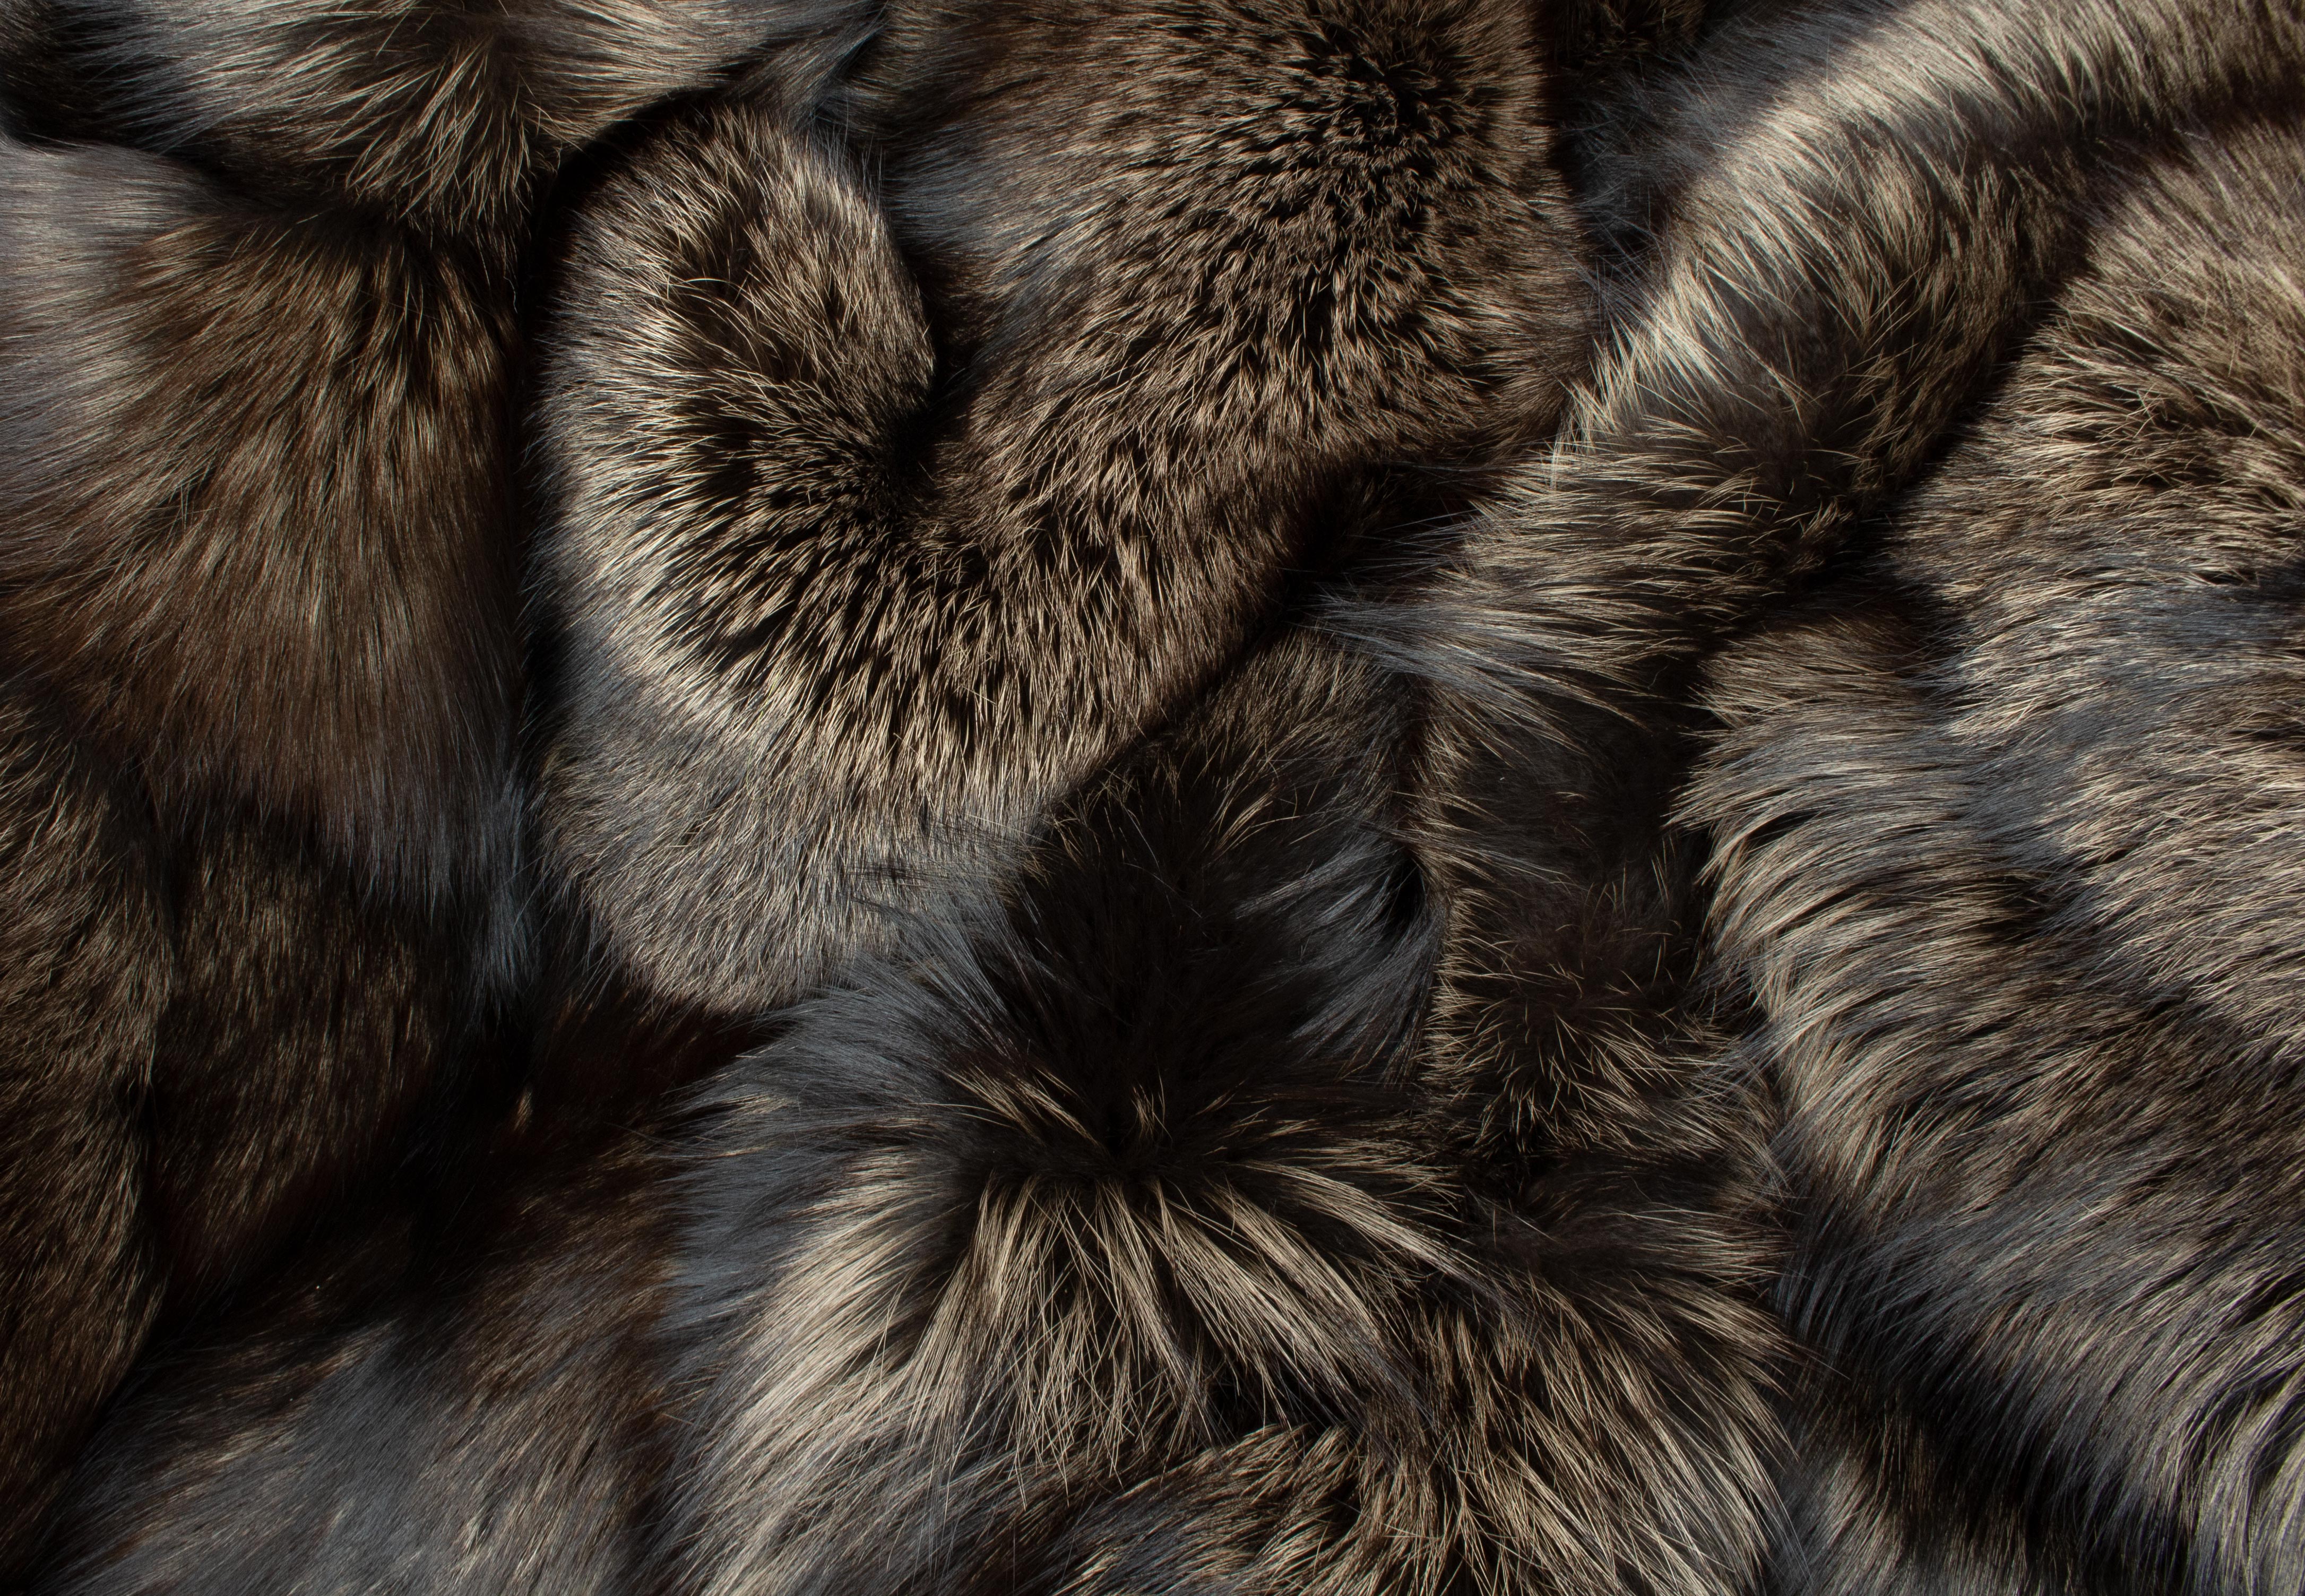 Patchwork Fur Blanket made with Silver Foxes in gray-brown